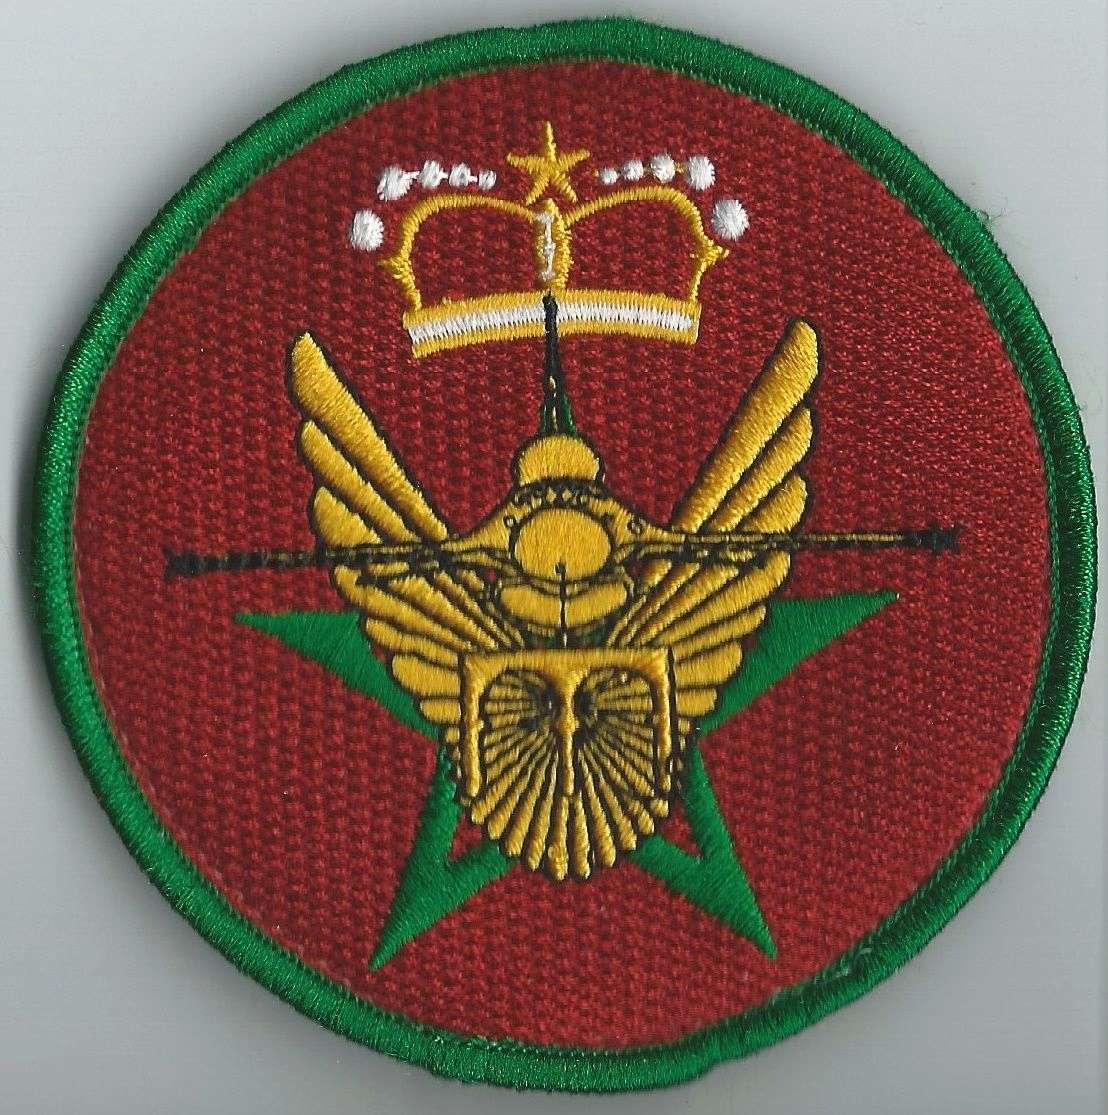 RMAF insignia Swirls Patches / Ecussons,cocardes et Insignes Des FRA - Page 6 Clipbo27